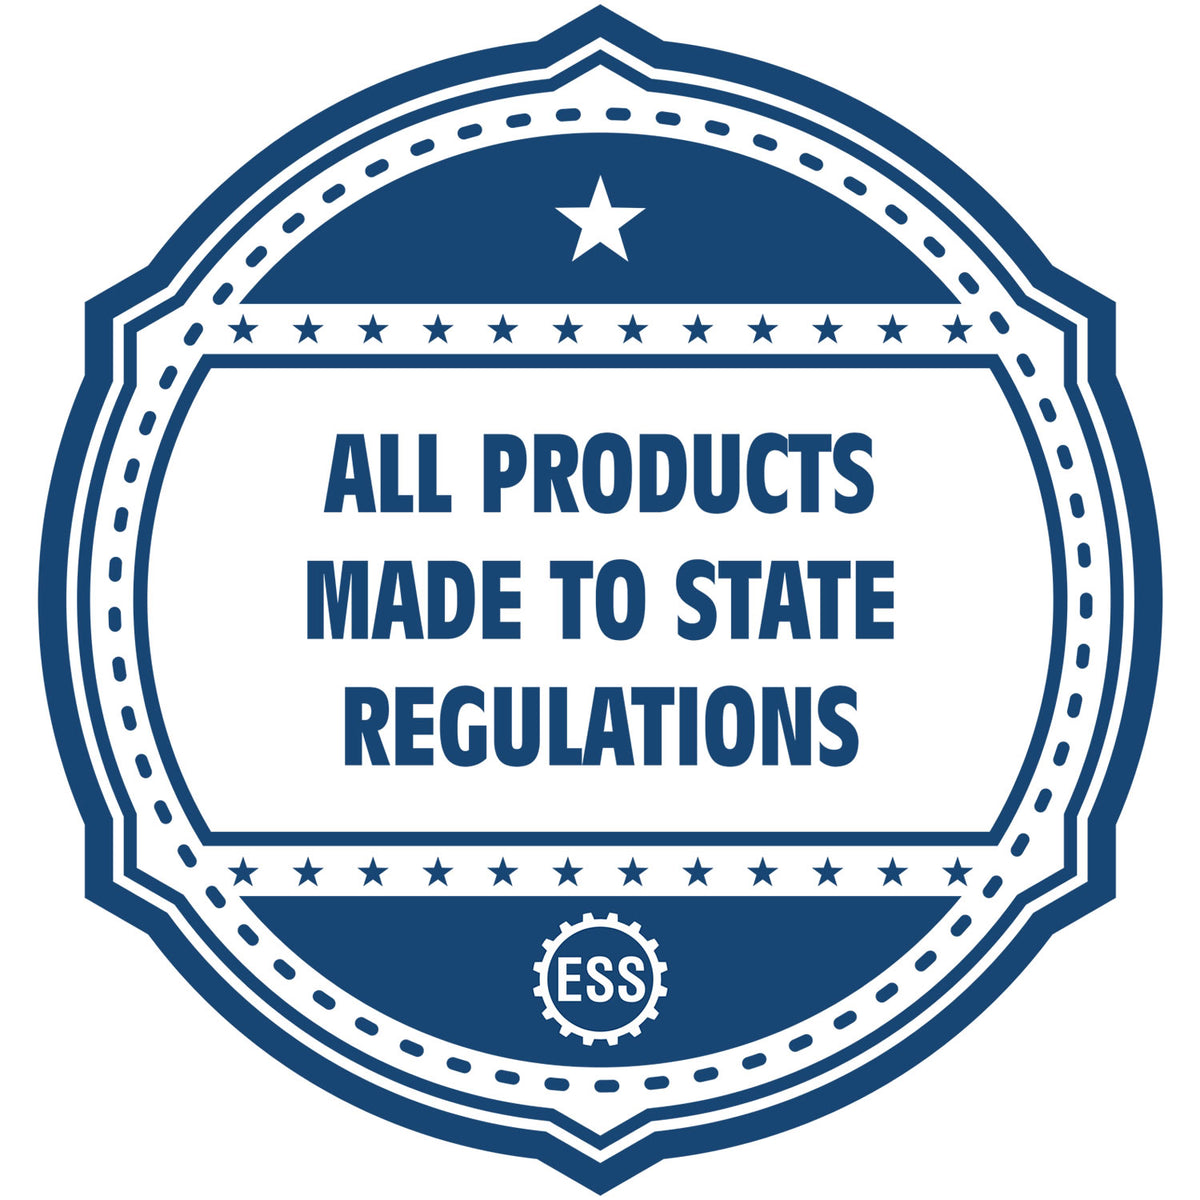 An icon or badge element for the Florida Engineer Desk Seal showing that this product is made in compliance with state regulations.